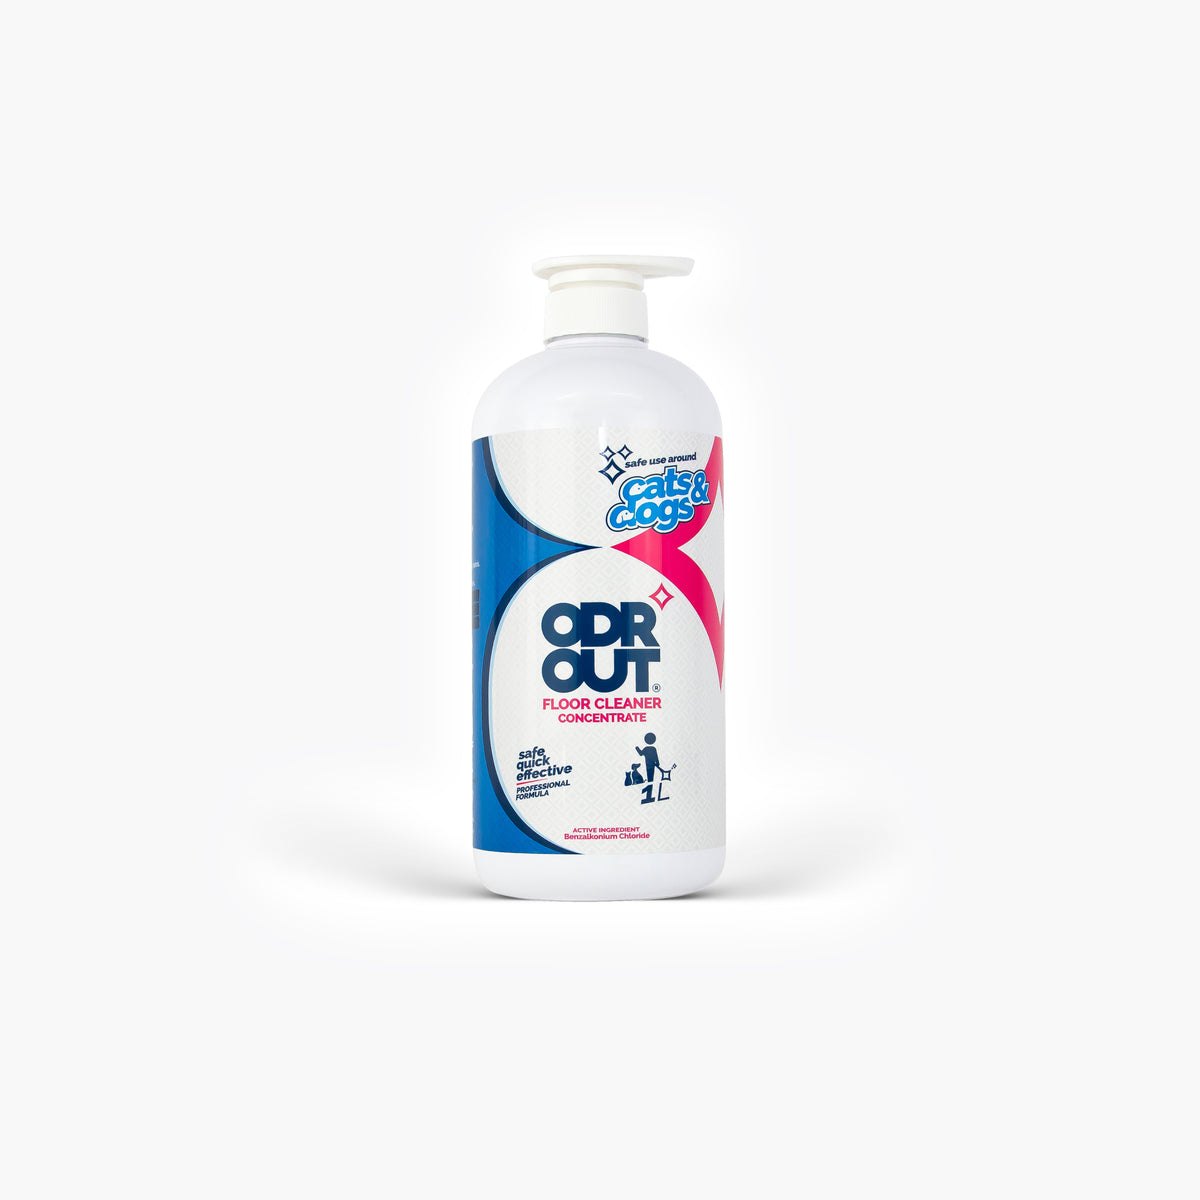 ODR OUT Anti Bacterial Floor Cleaner